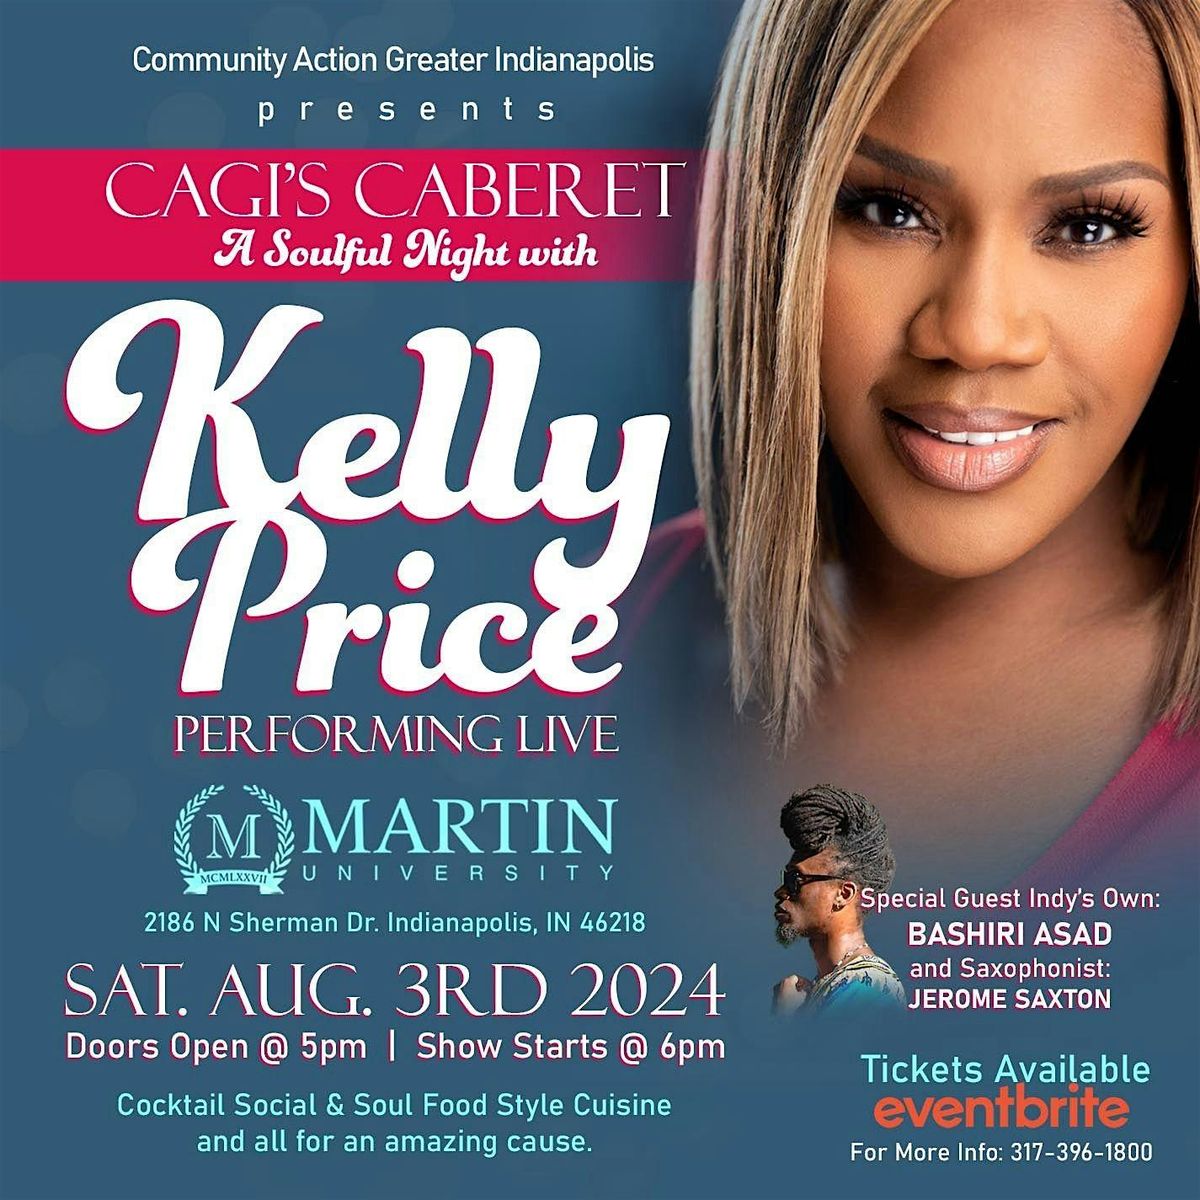 CAGI's CABARET "A Soulful Night with Kelly Price"